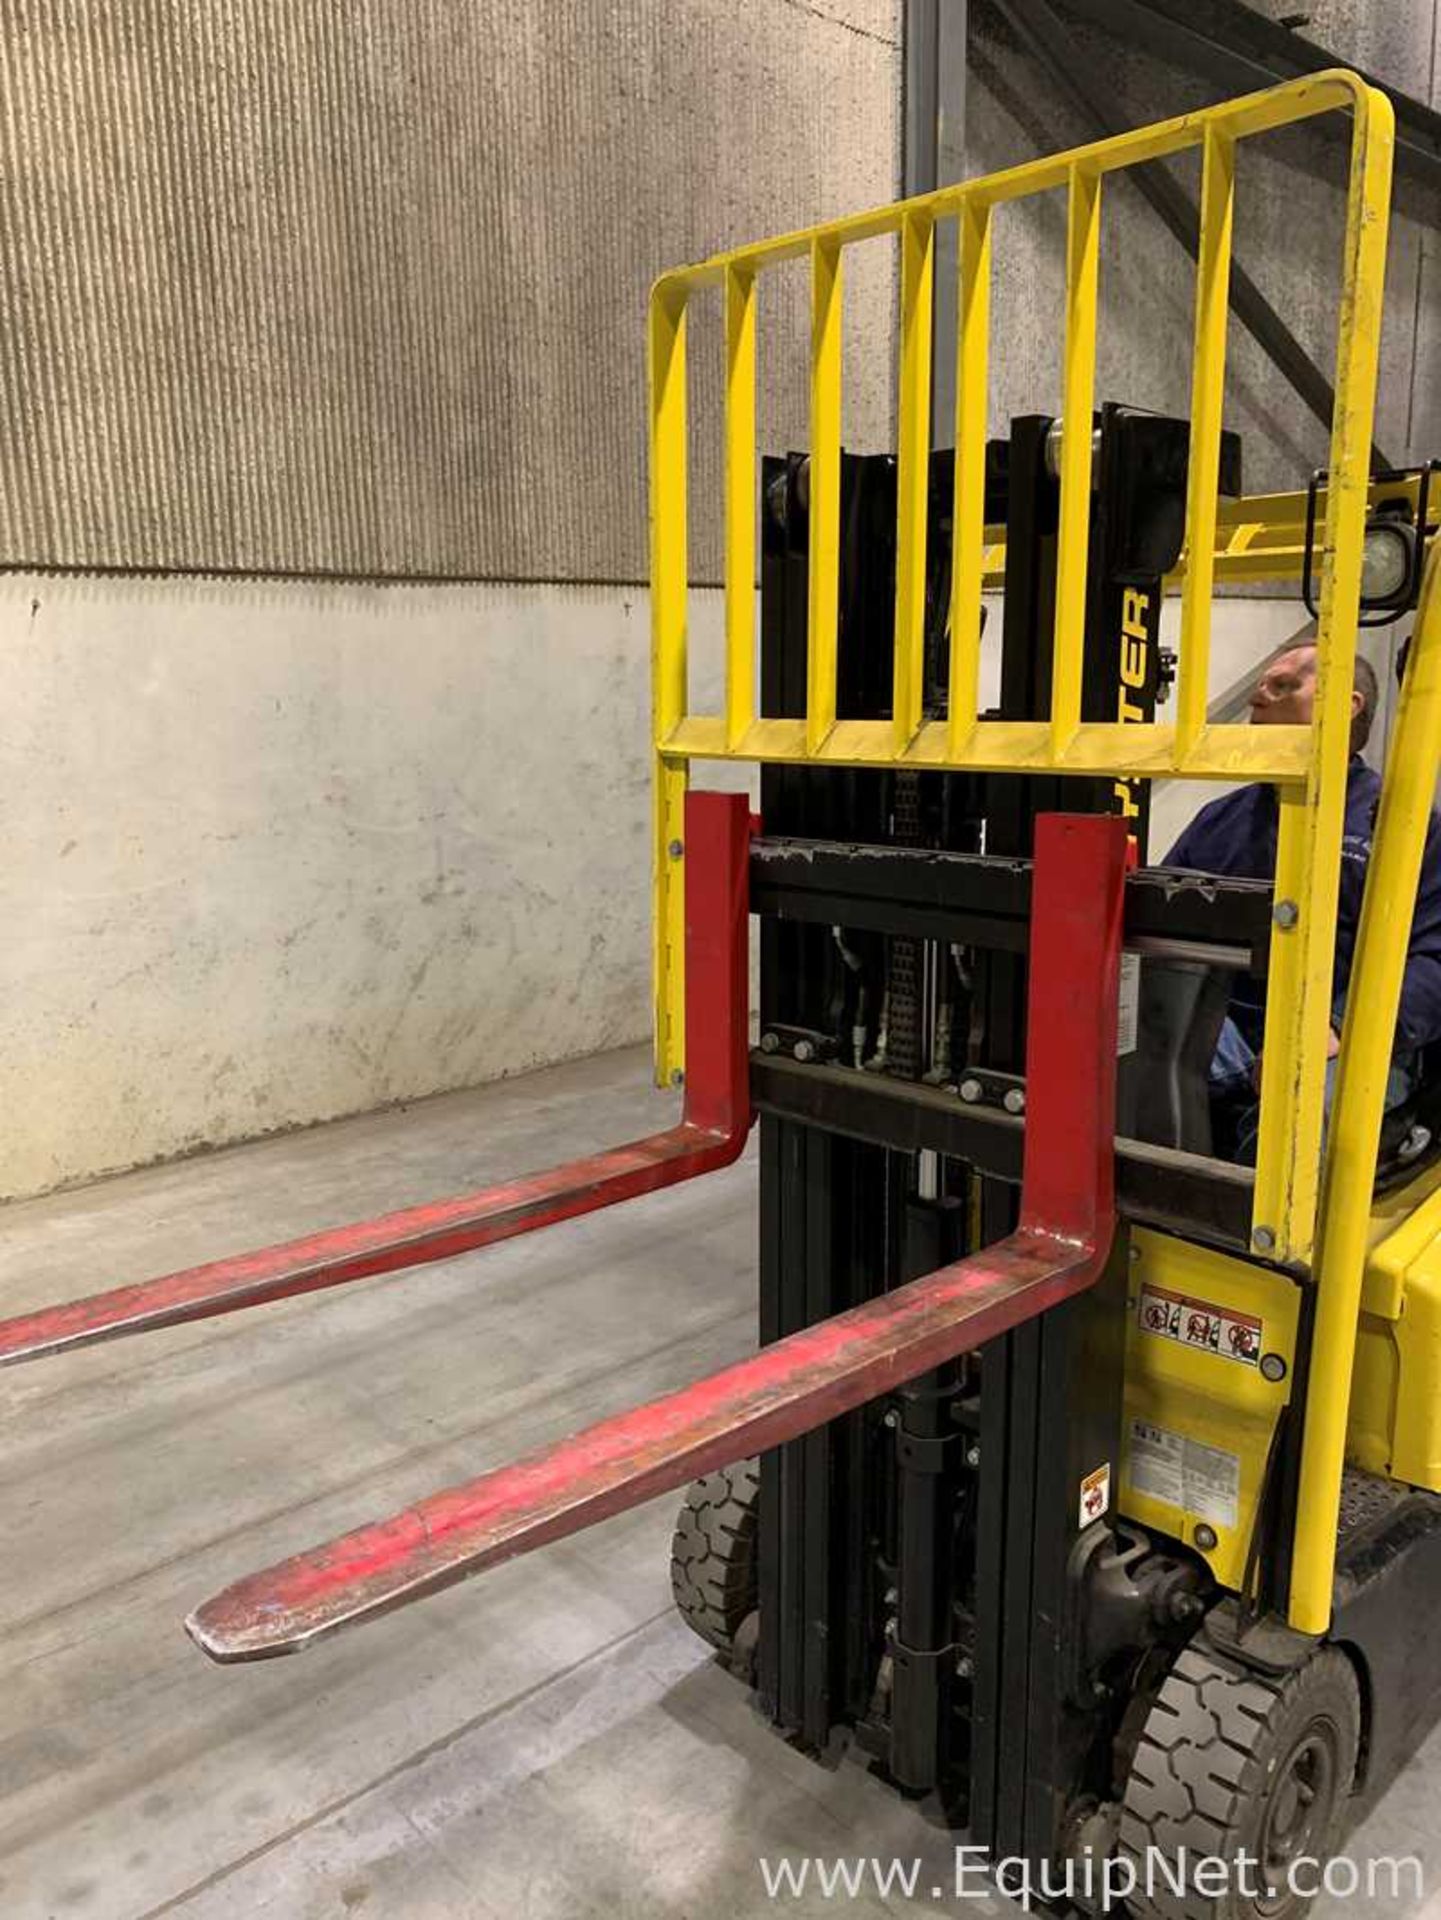 Hyster R30CH 2500 LB. Electric Pallet Jack Currently Non Operational